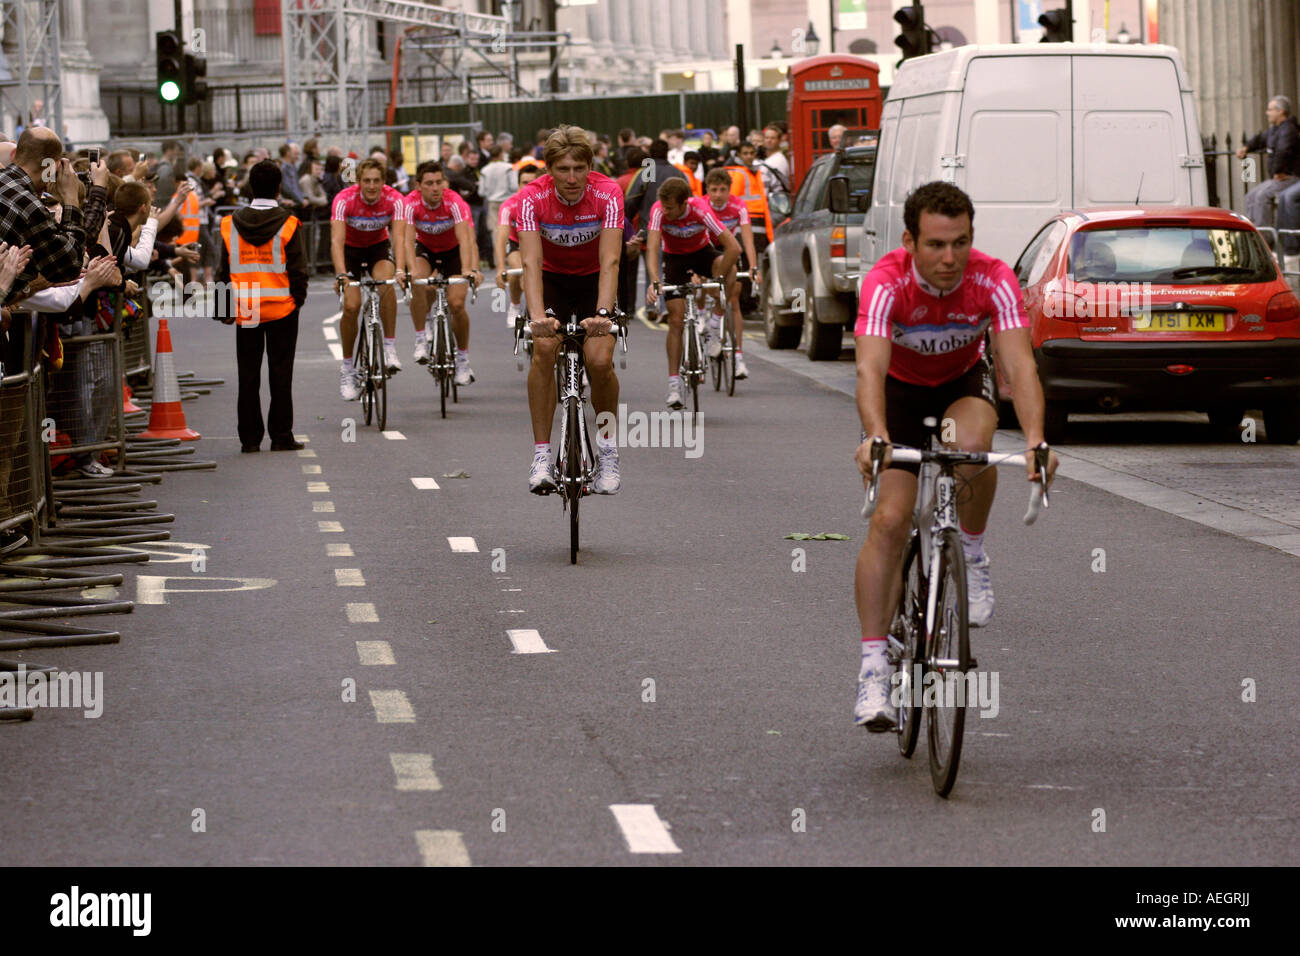 The T Mobile Tour De France team leave Trafalgar Square at the Grand Depart in London and pass spectators Stock Photo